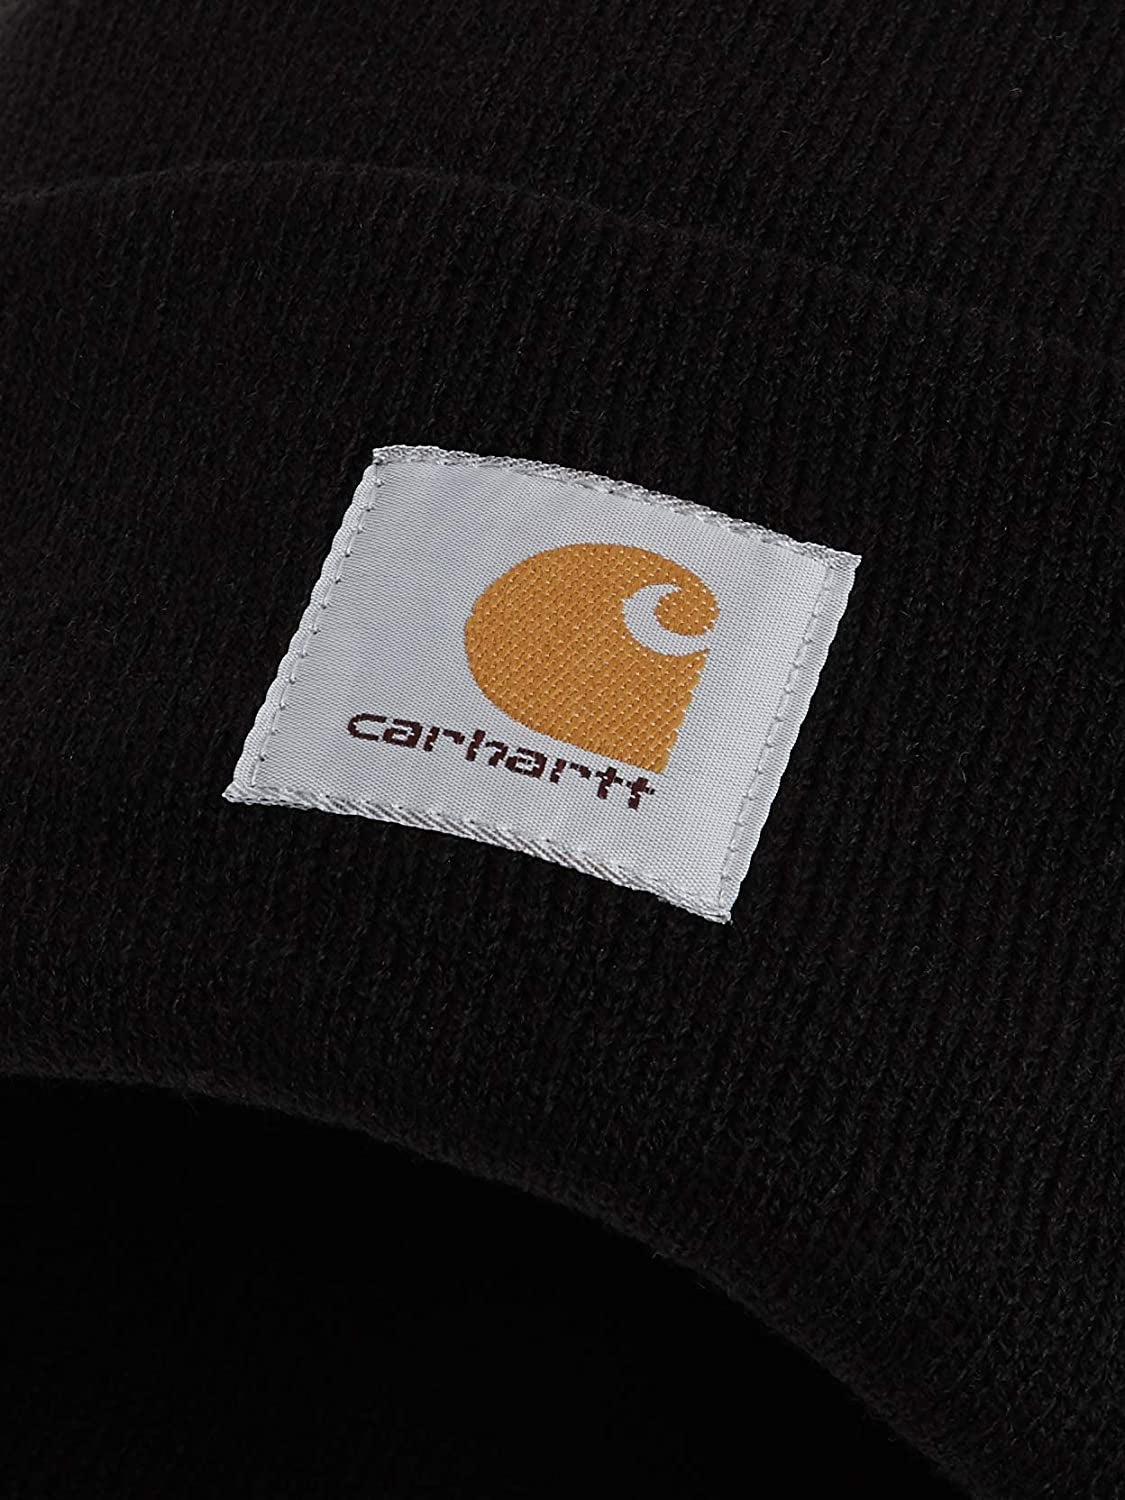 "Stay Warm and Stylish with Our Cozy Men's Knit Cuffed Beanie Hat!"